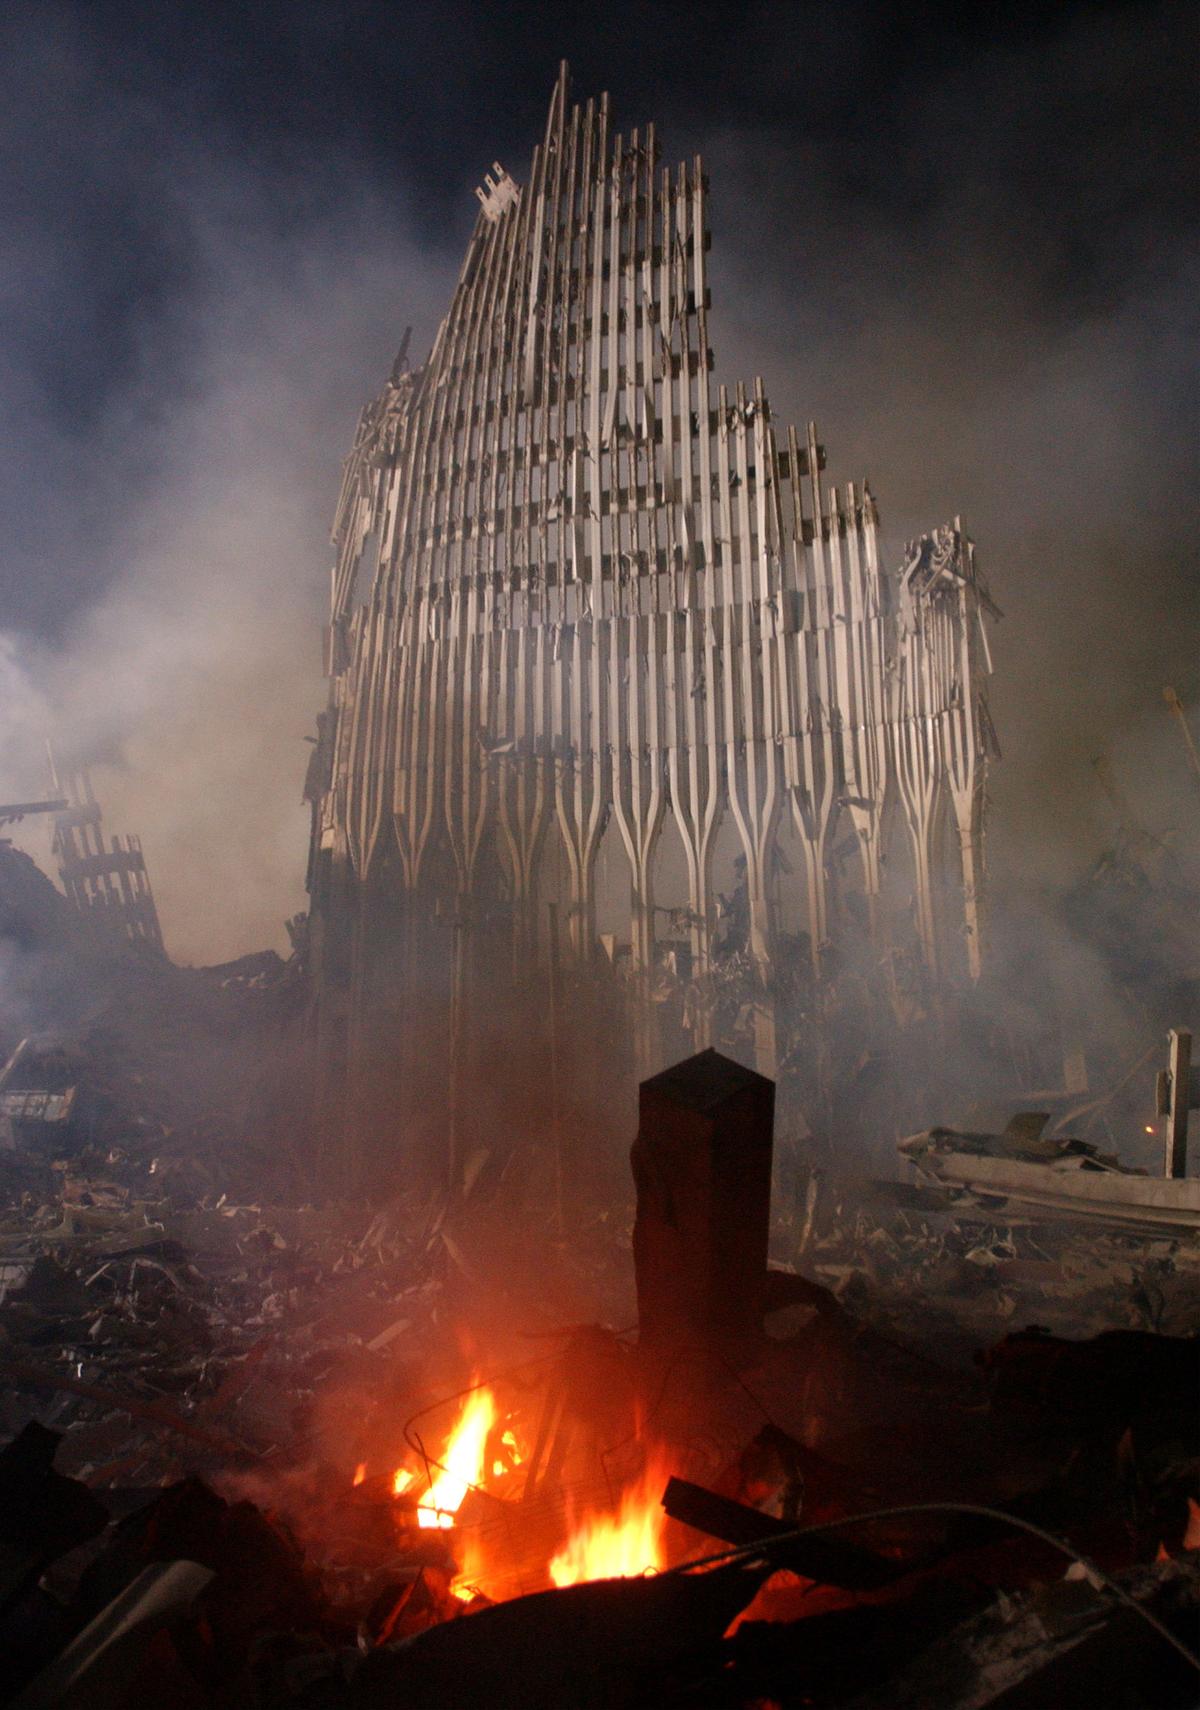 Rubble burns at the remains of the destroyed World Trade Center towers in New York City on Sept. 12, 2001, one day after the twin towers were leveled in a terrorist attack. (Spencer Platt/Getty Images)